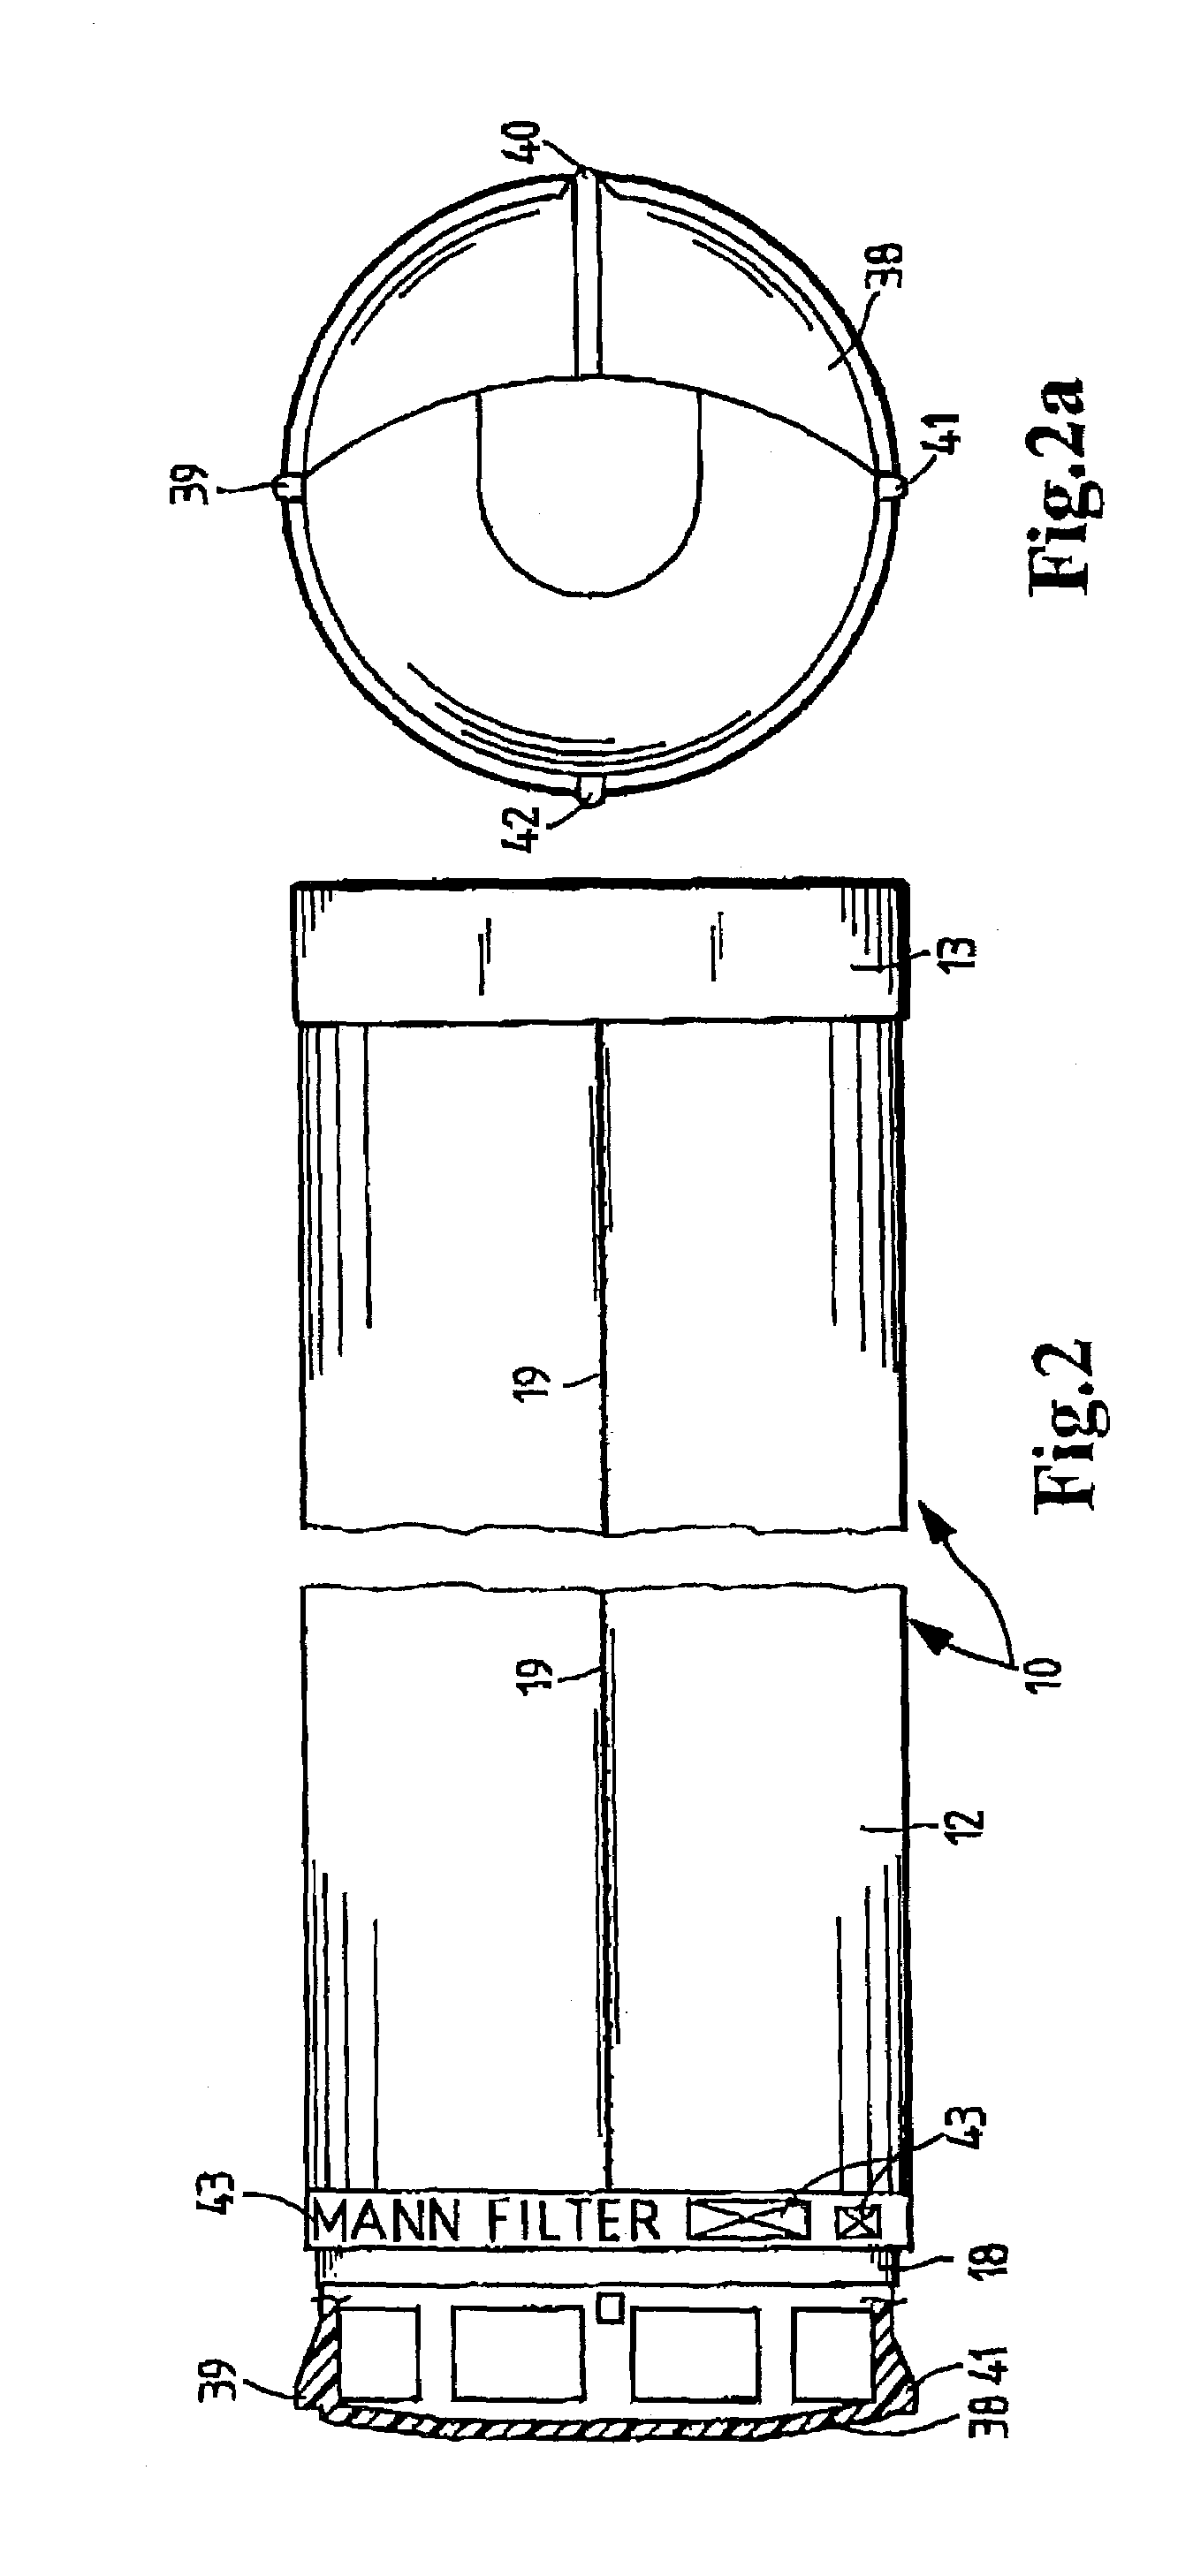 Filter element for filtering a fluid stream